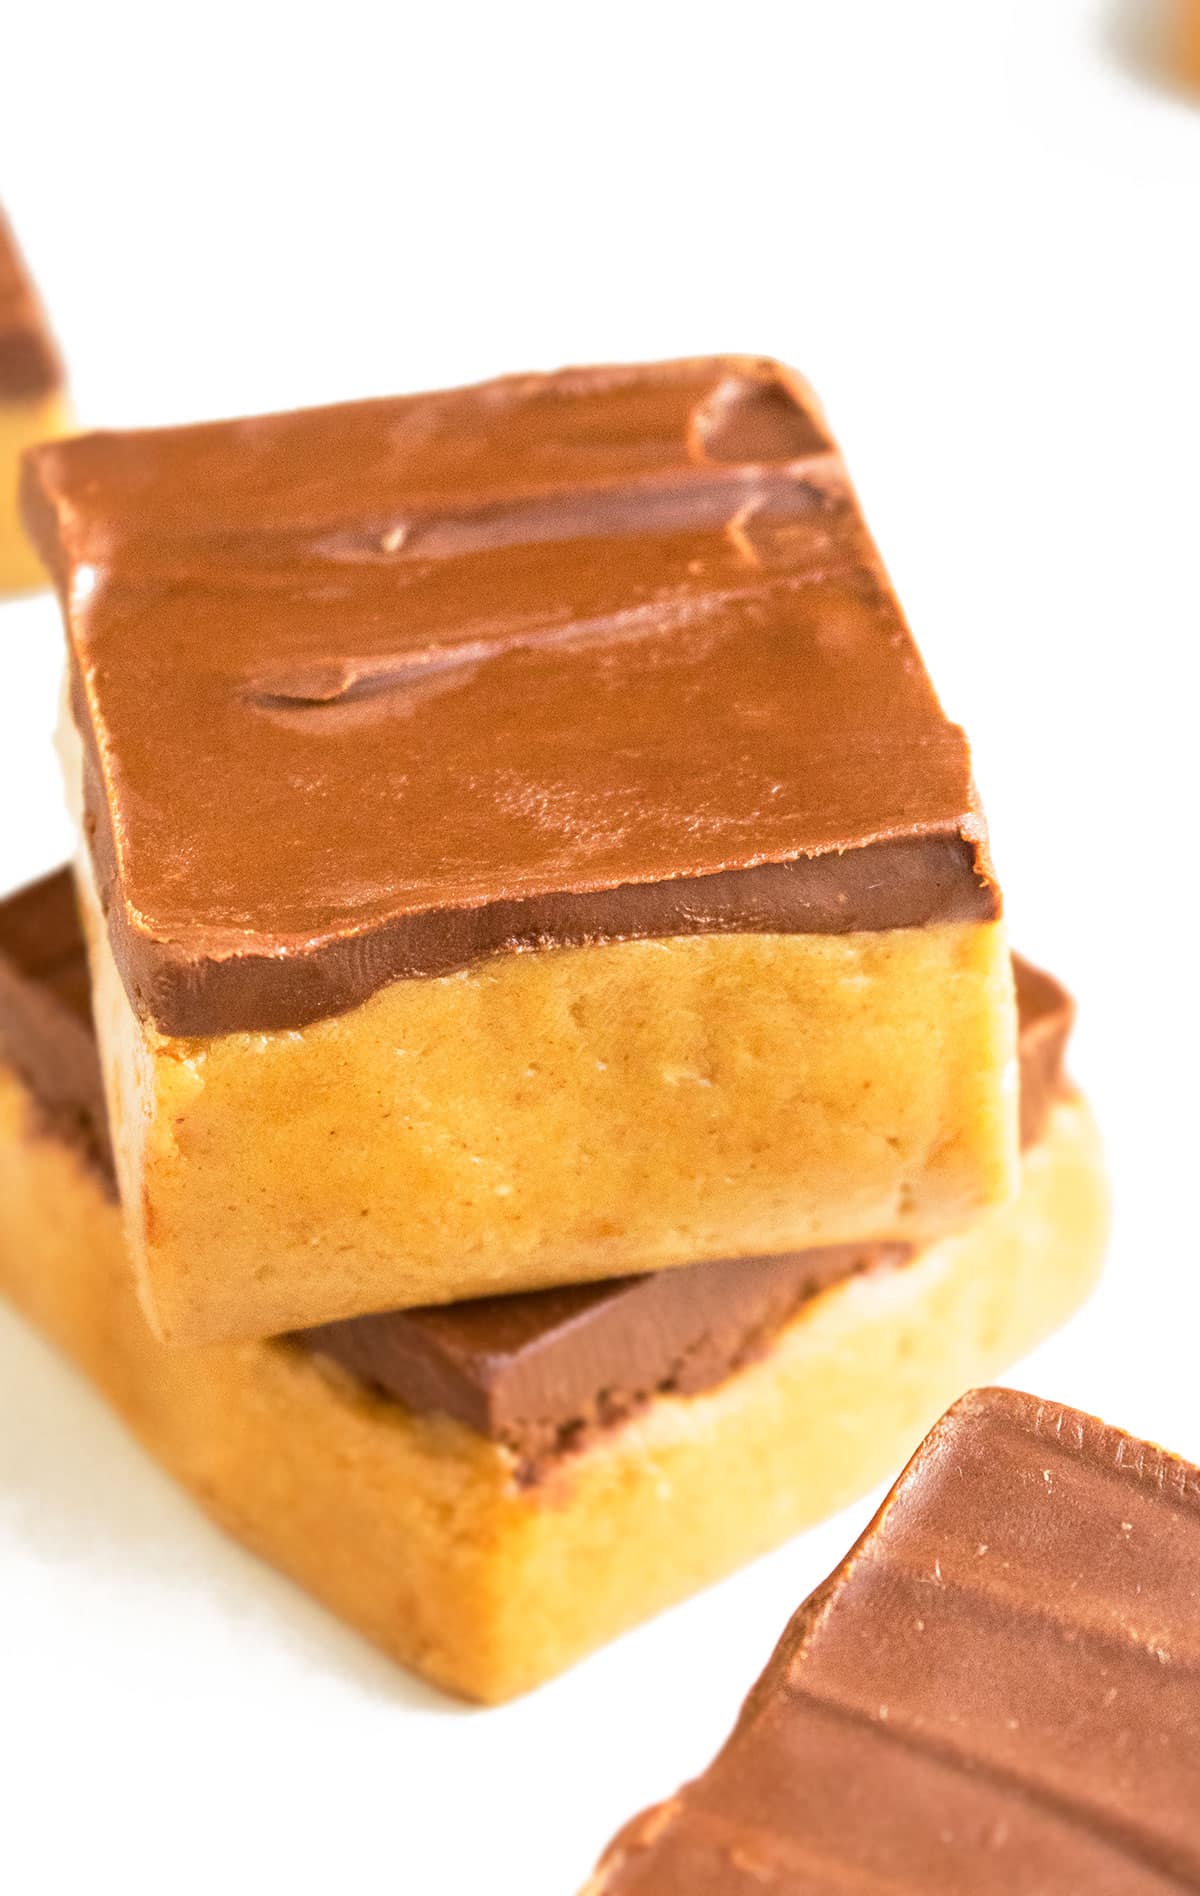 Stack of Easy No Bake Peanut Butter Bars on White Background.